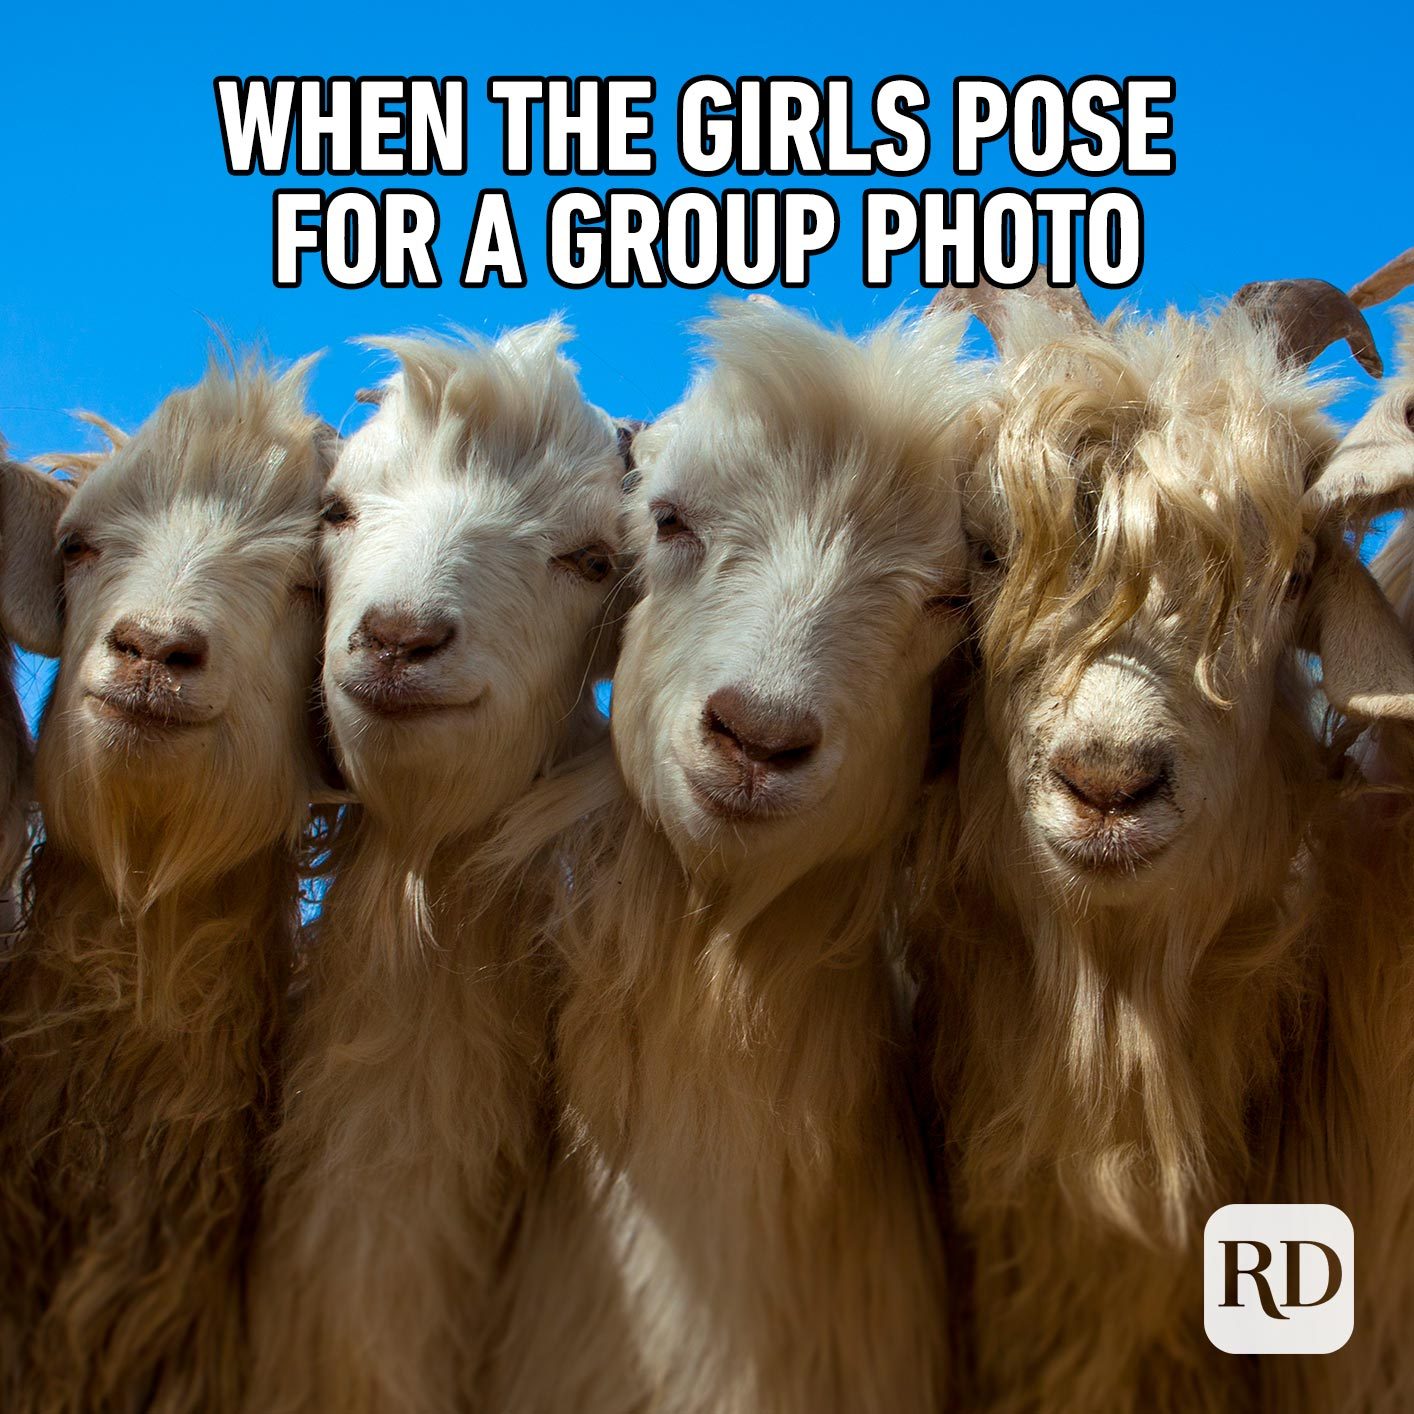 Goats gathering close. Meme text: When the girls pose for a group photo